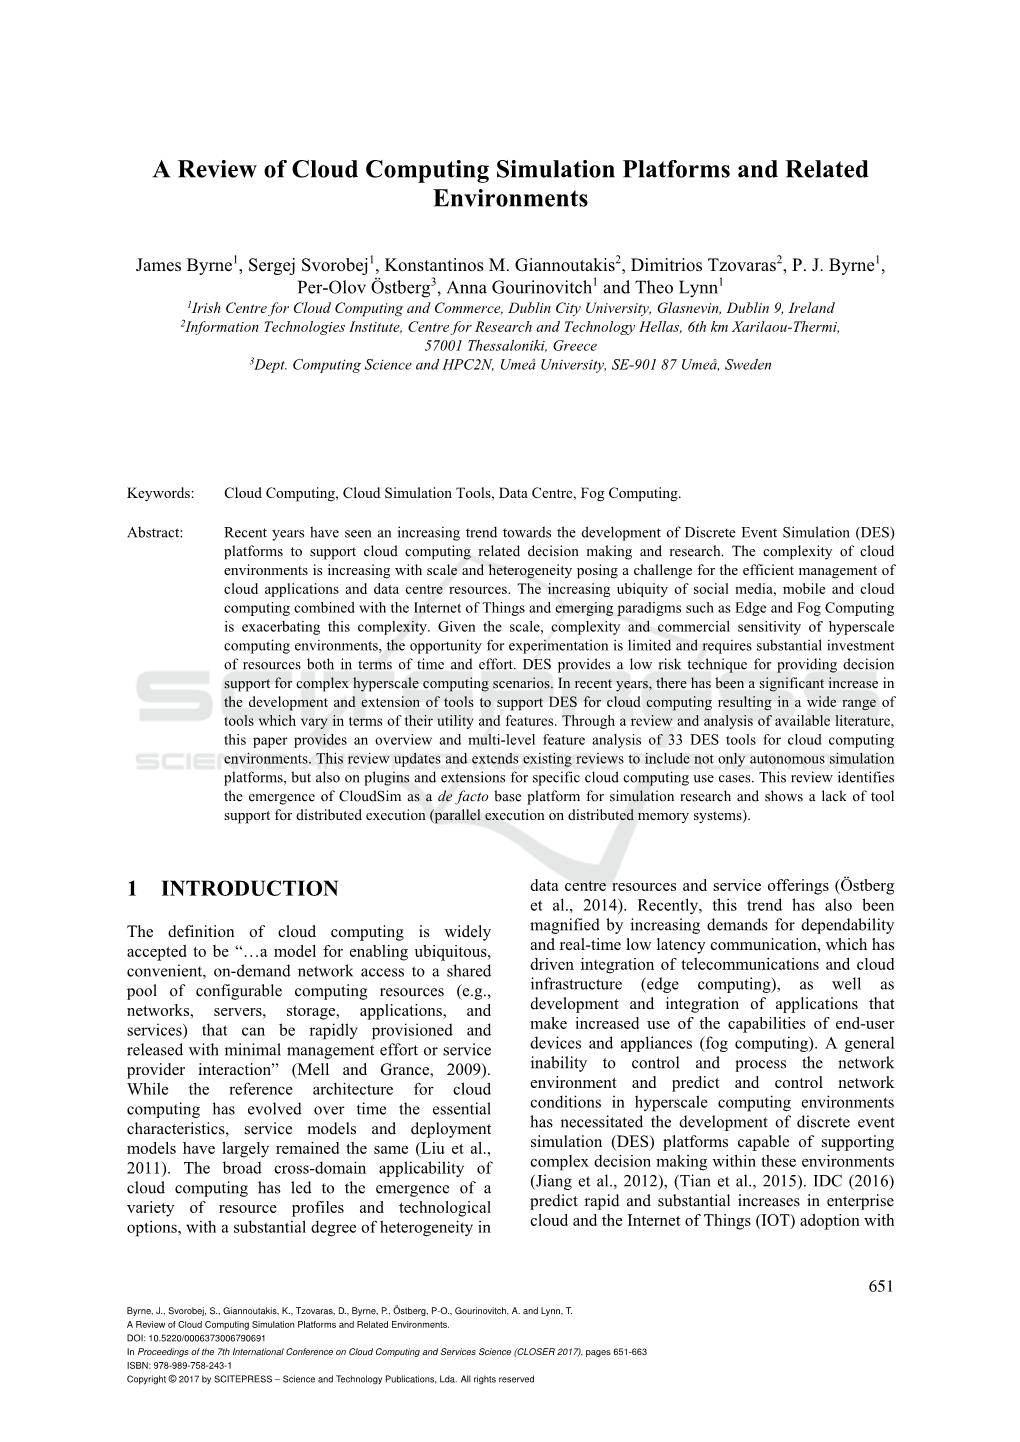 A Review of Cloud Computing Simulation Platforms and Related Environments